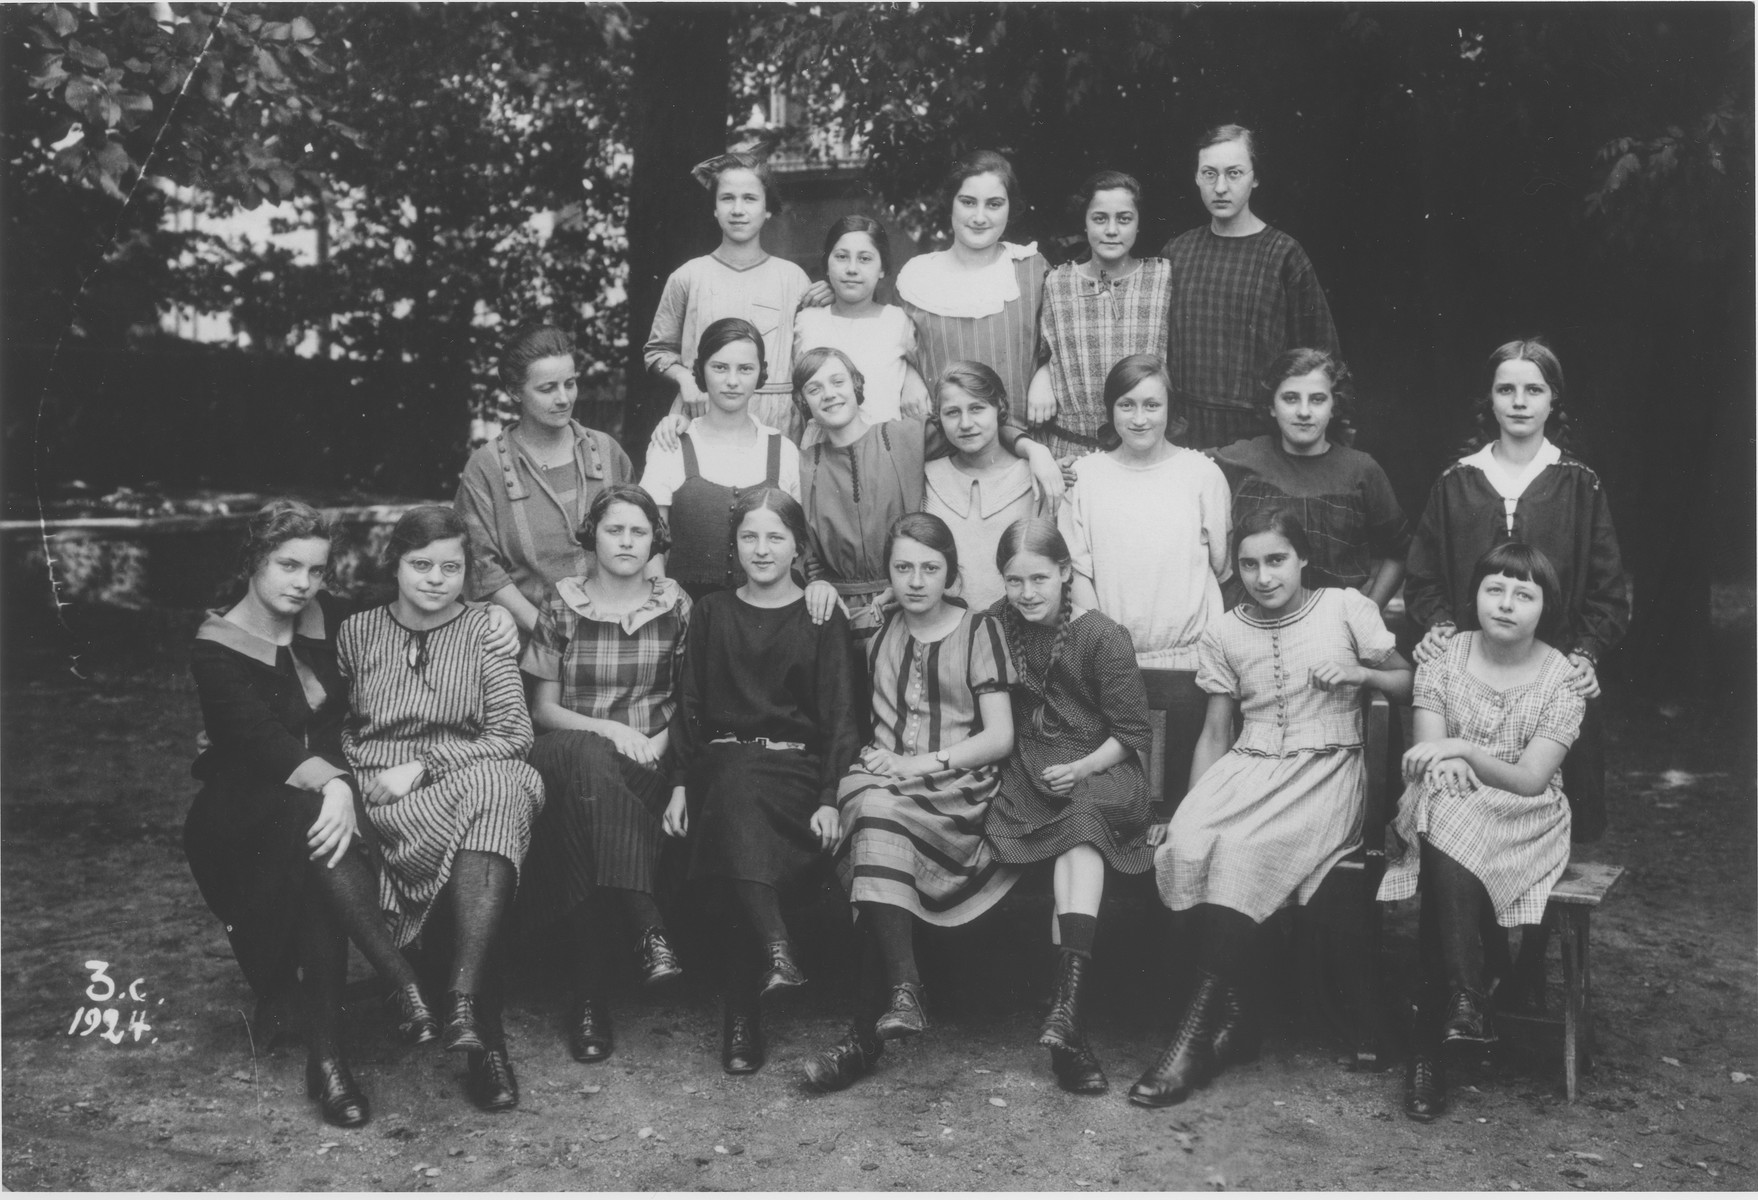 Group portrait of girls in the thrid form at a school in Guntersblum, Germany.

Among those pictured is Hede Rube (top row, center).